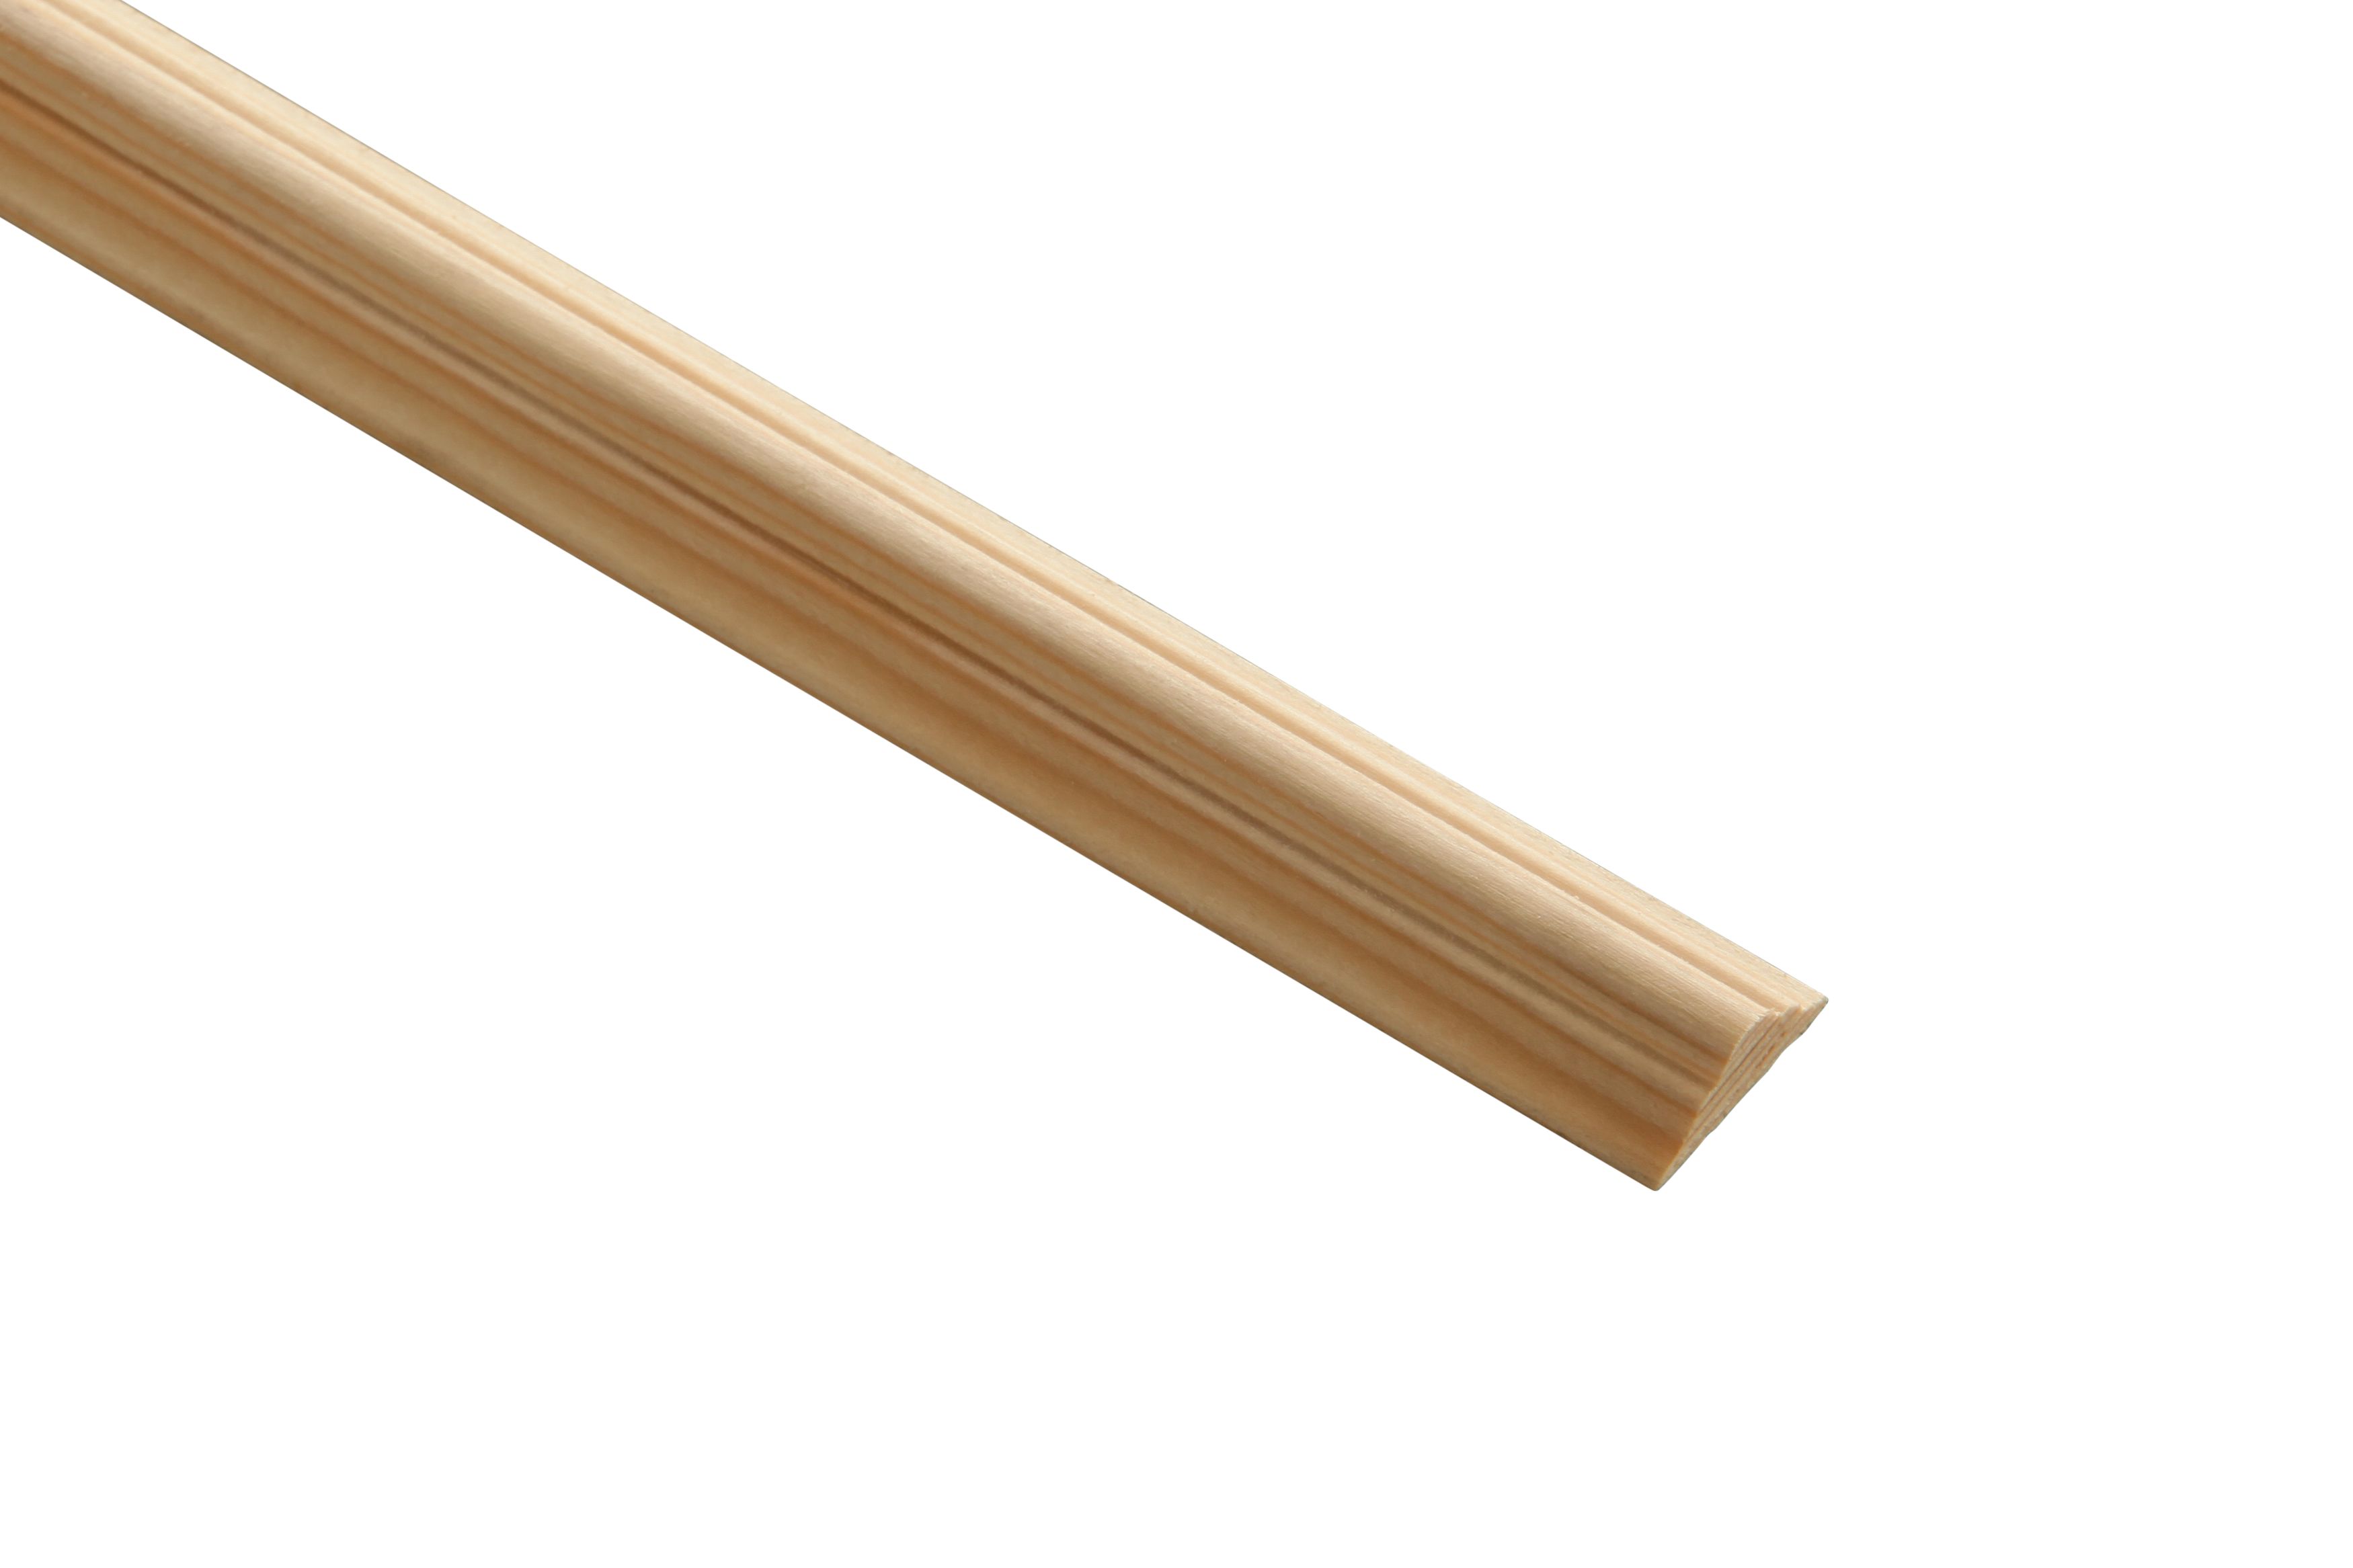 Image of Wickes Pine Double Astragal Moulding - 21 x 8 x 2400mm